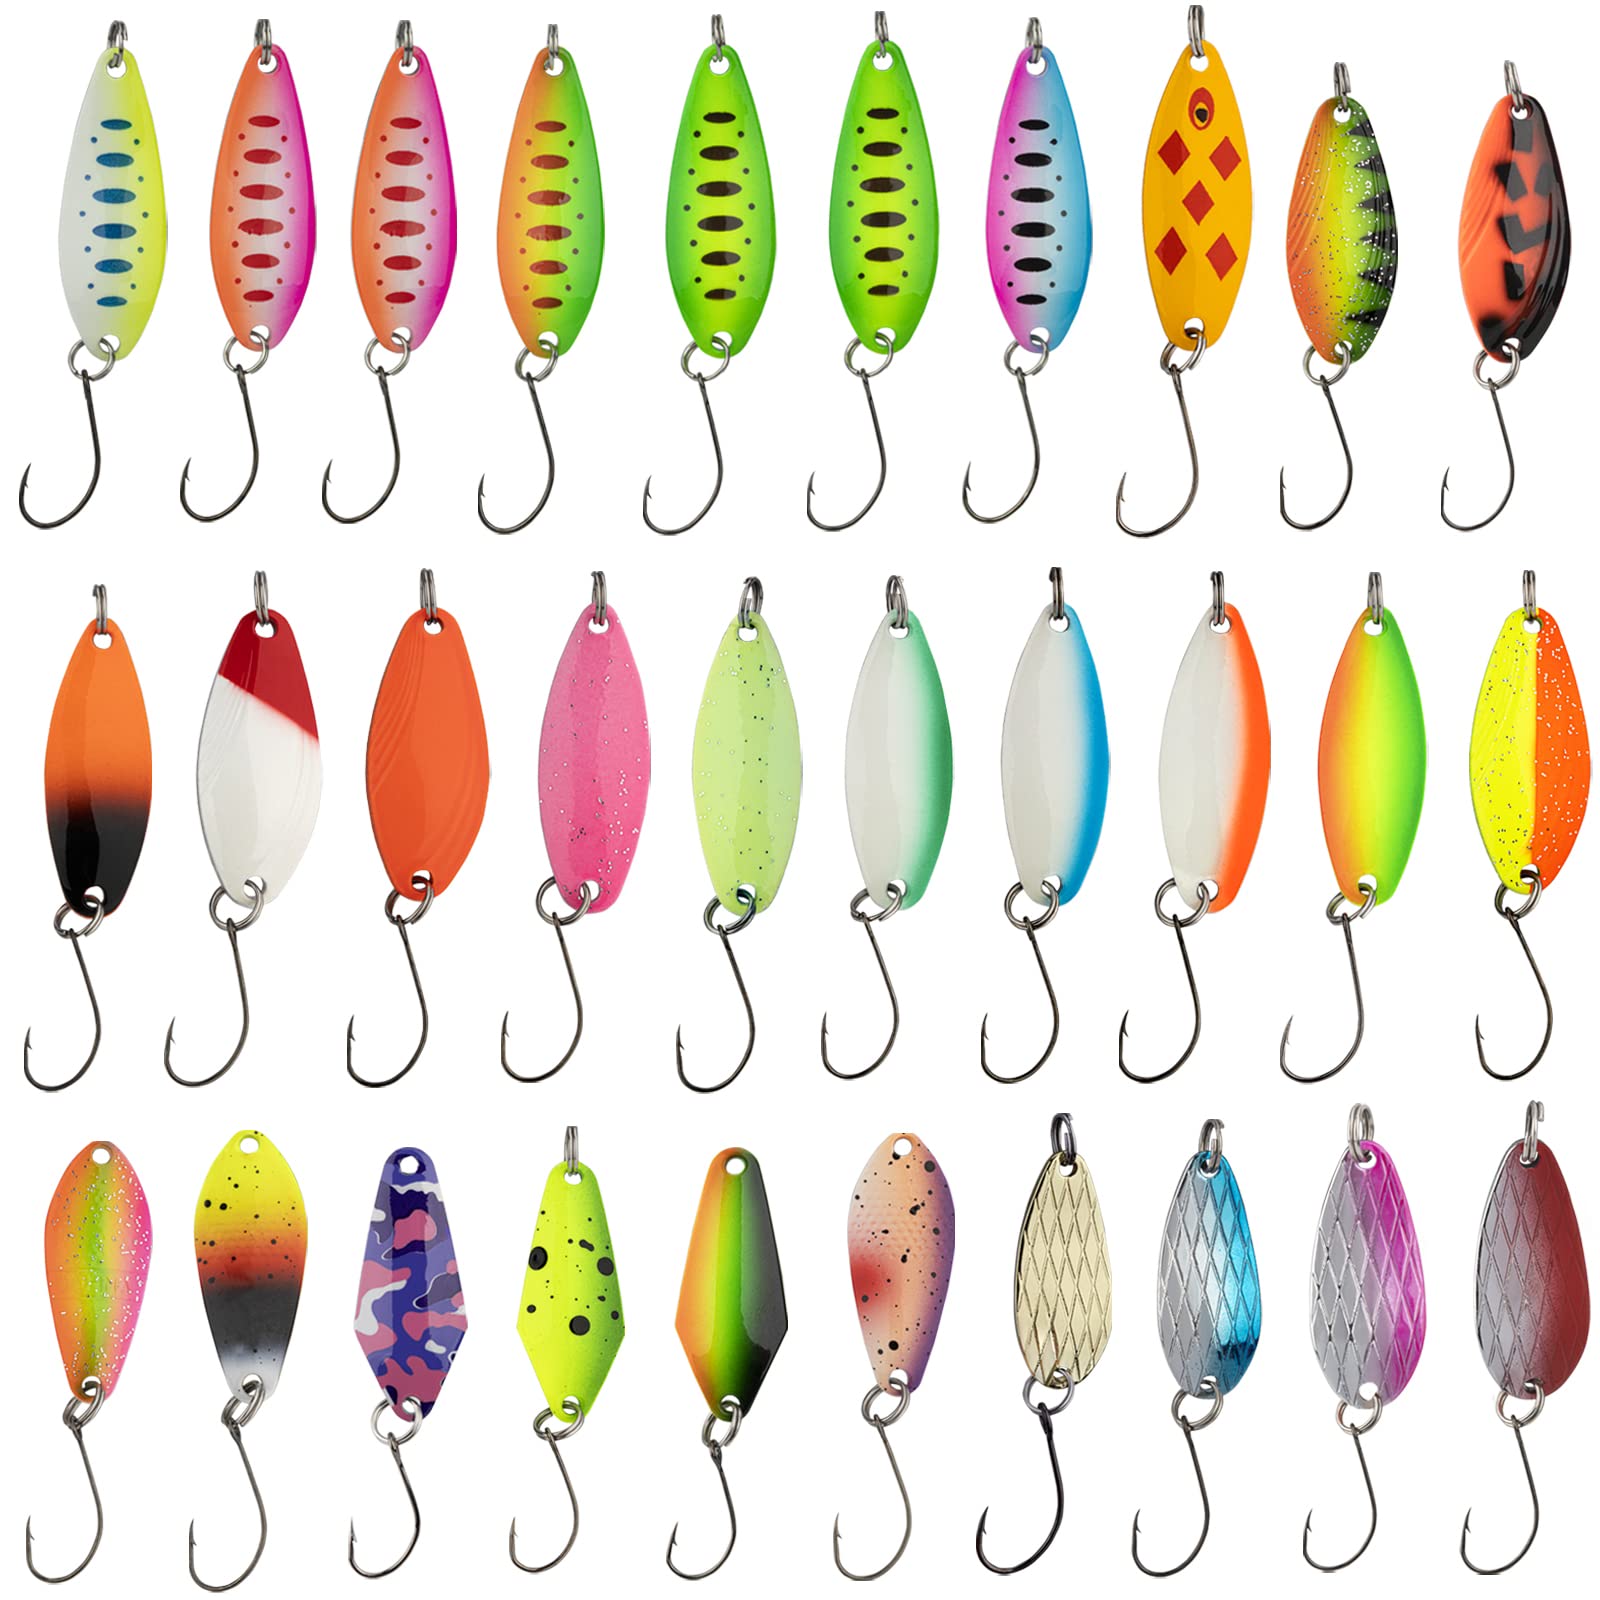 QualyQualy Fishing Lure Rig Spinnerbait, Walleye Rig Spinner